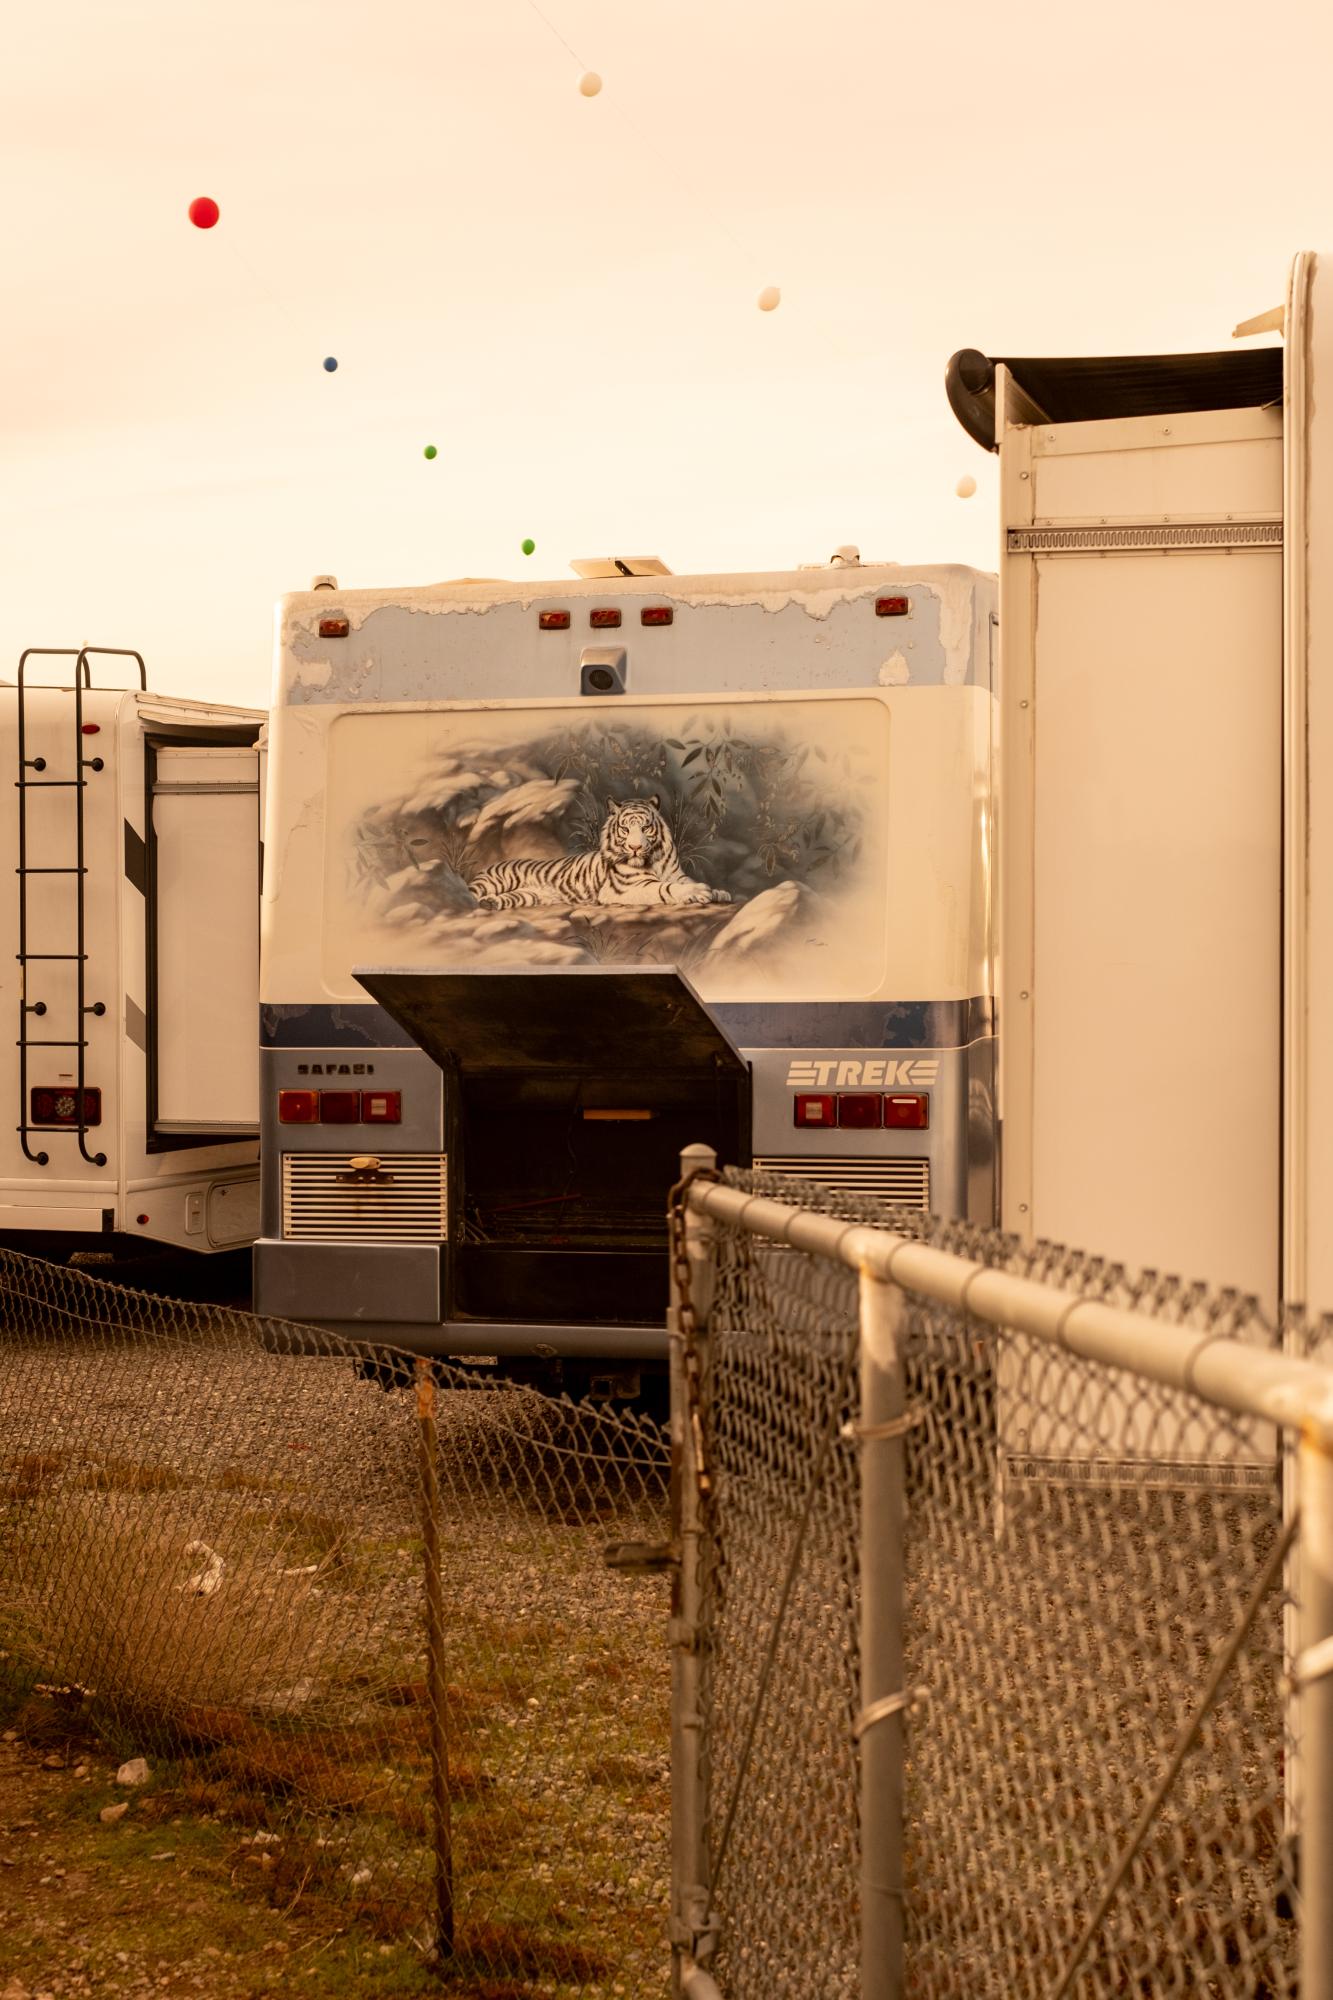 A Warm Winter (An Ongoing Journey) - An RV that I saw and loved while walking in Quartzsite,...